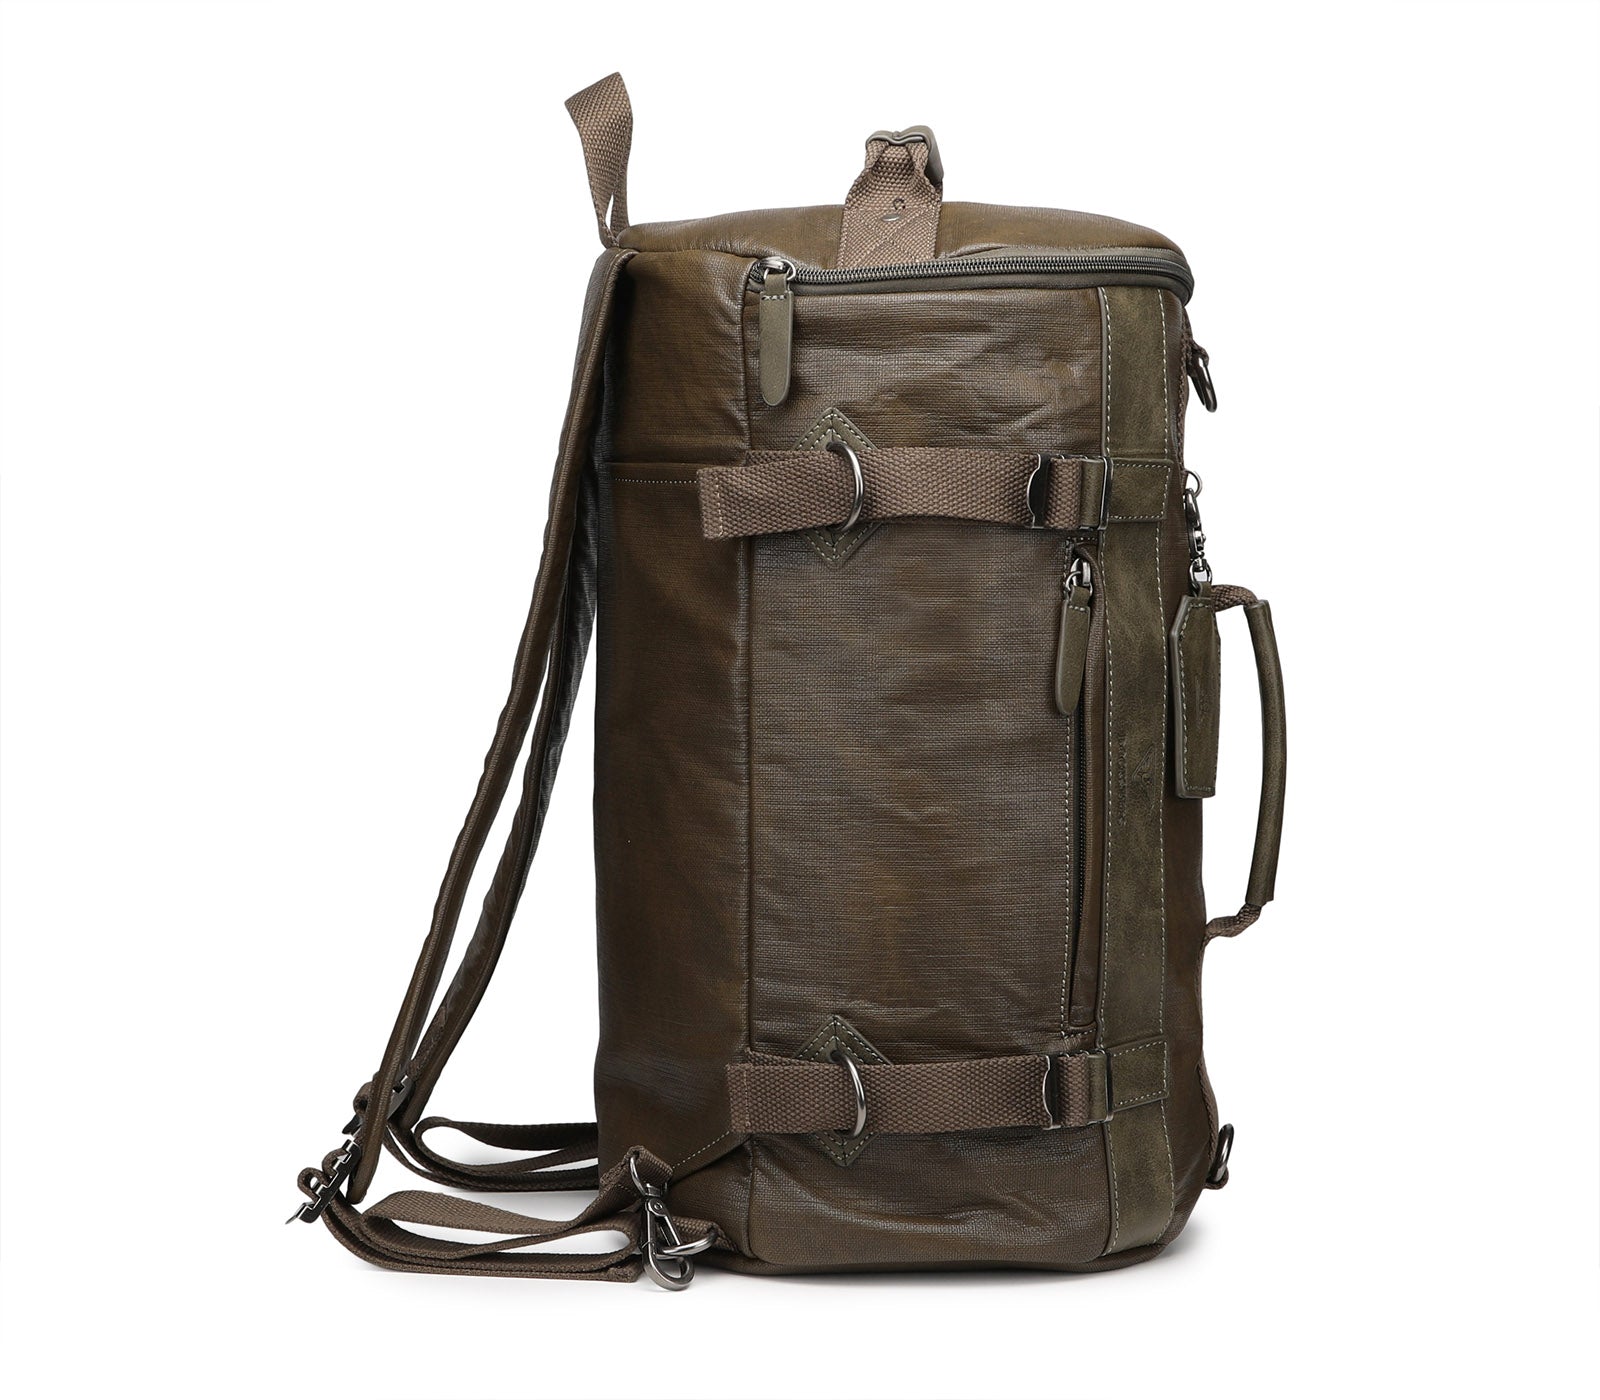 Duffle Bag with Handle that Becomes Backpack Military Green Color